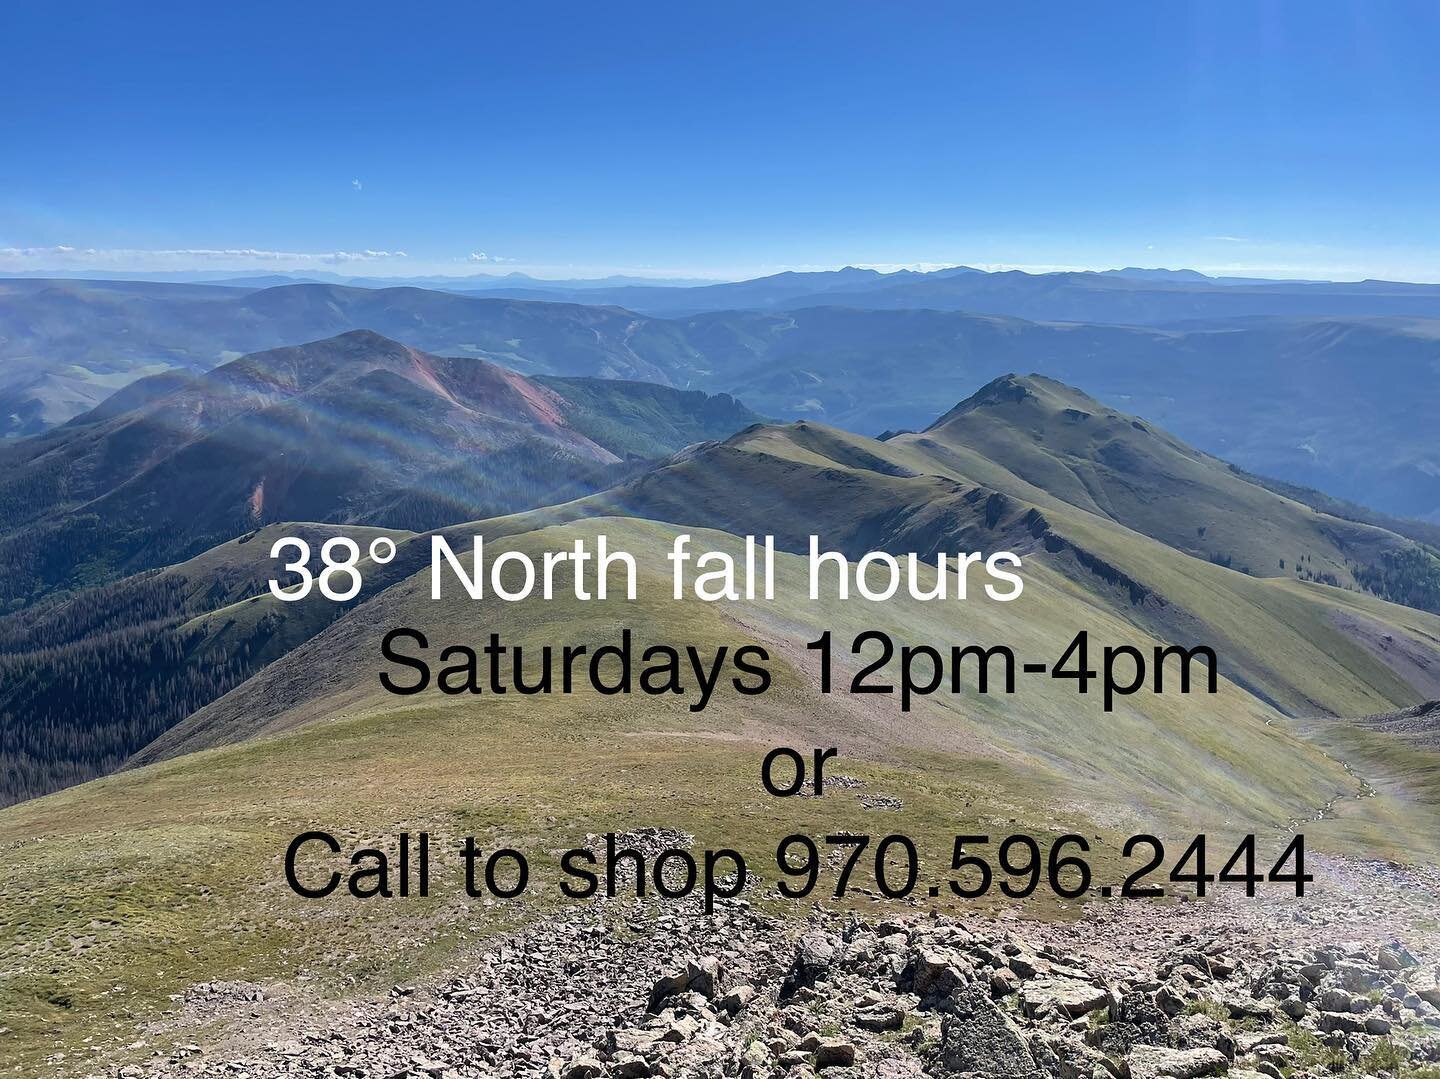 Fall hours 🍁 Saturdays 12PM-4PM
or call to shop, 970.596.2444! Online ordering for pick up or shipping is always available, www.38degreesnorthlc.com! 

#38degreesnorthlc #lakecitycolorado